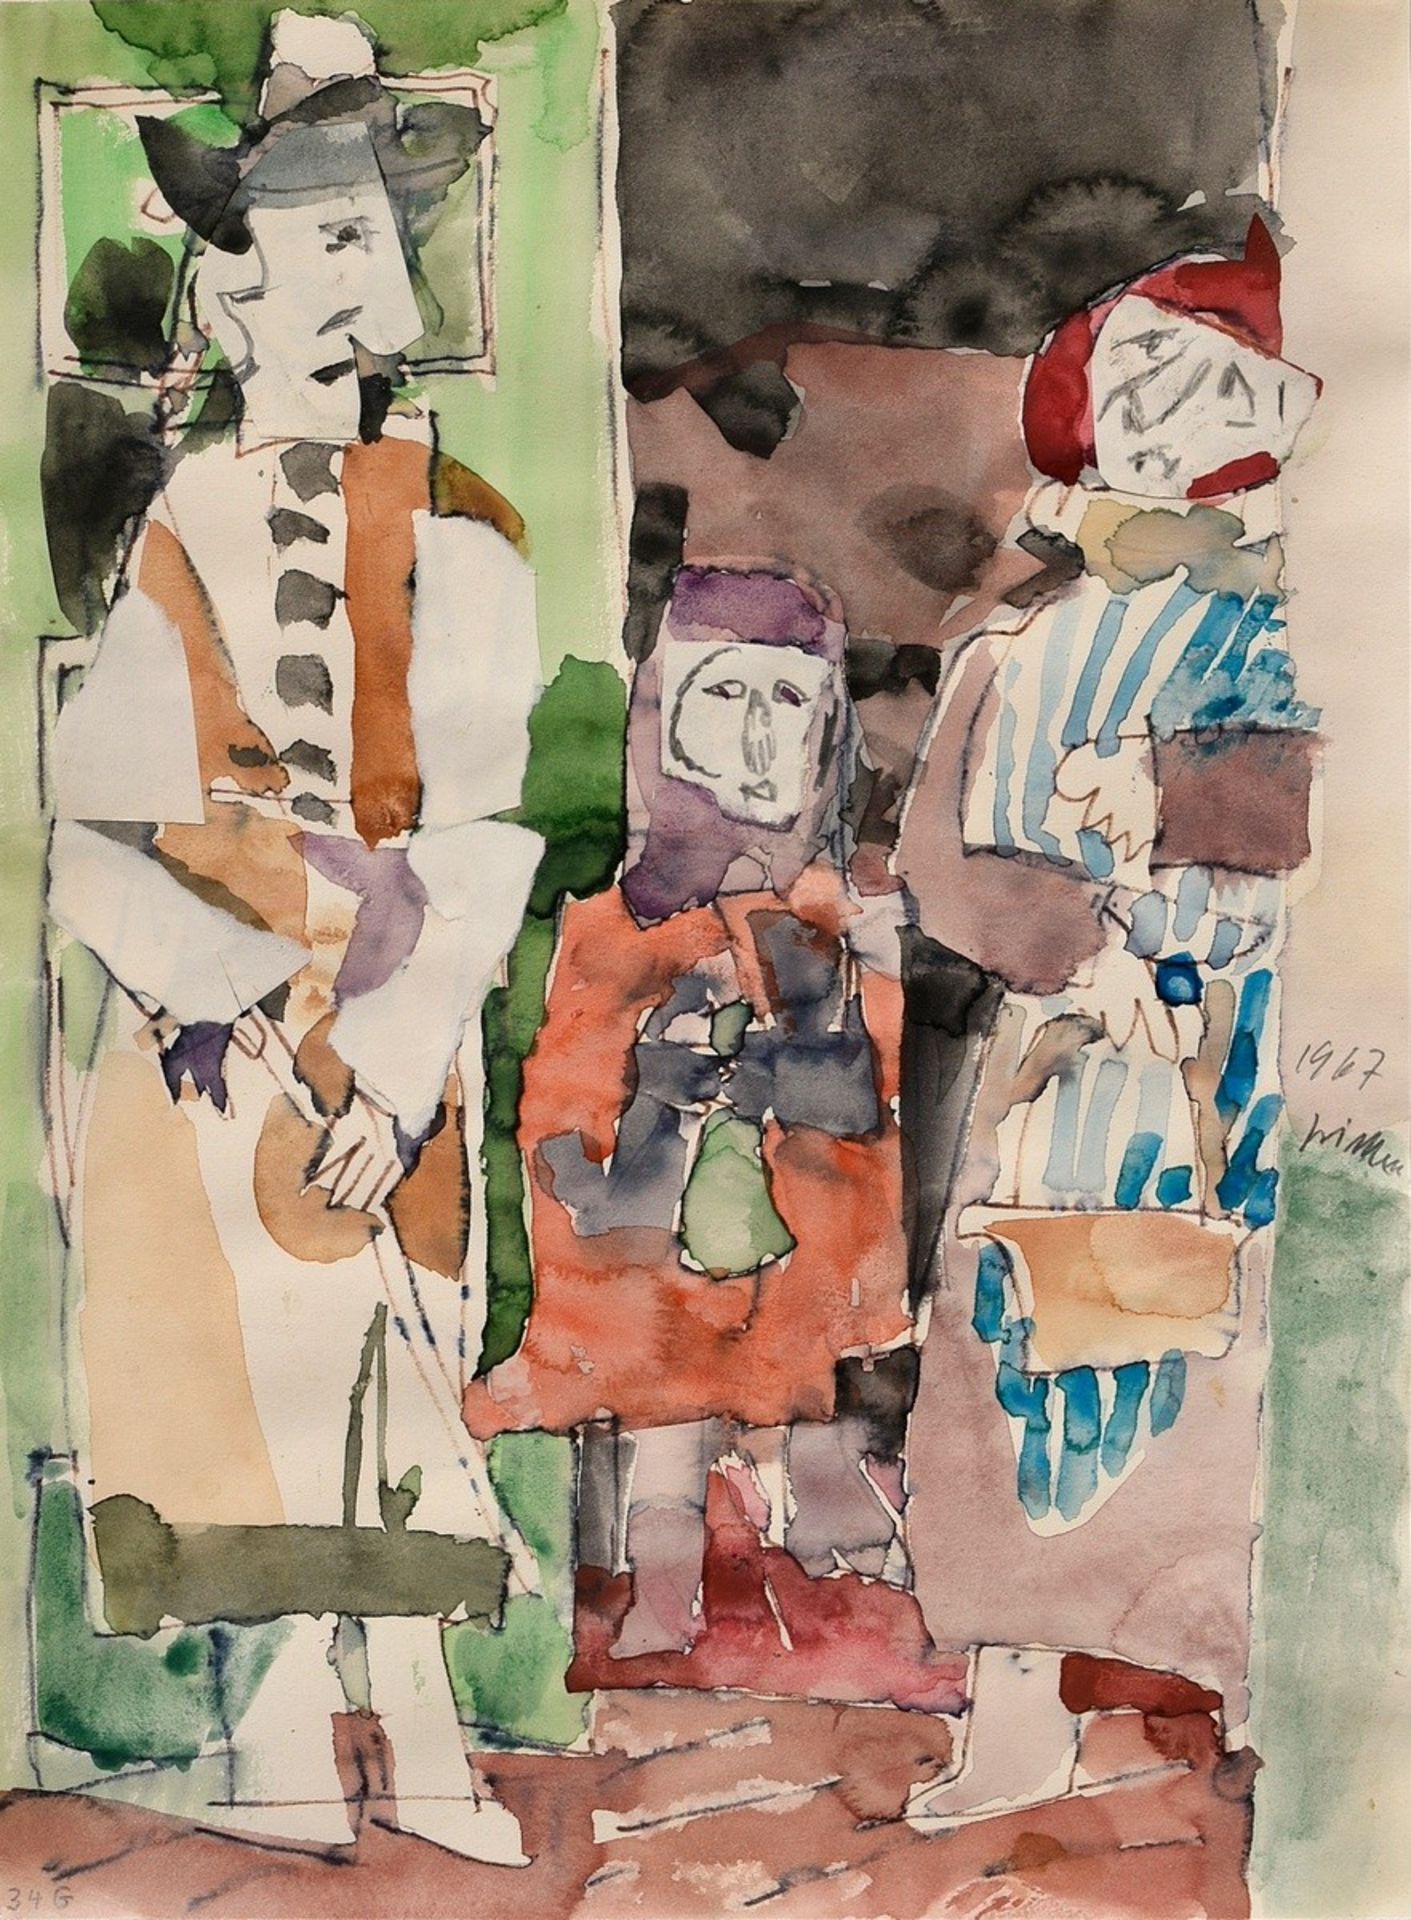 Grimm, Wilhelm (1904-1986) 'Three in the door' 1967, watercolour/pencil/collage, m.r. sign./dat., i